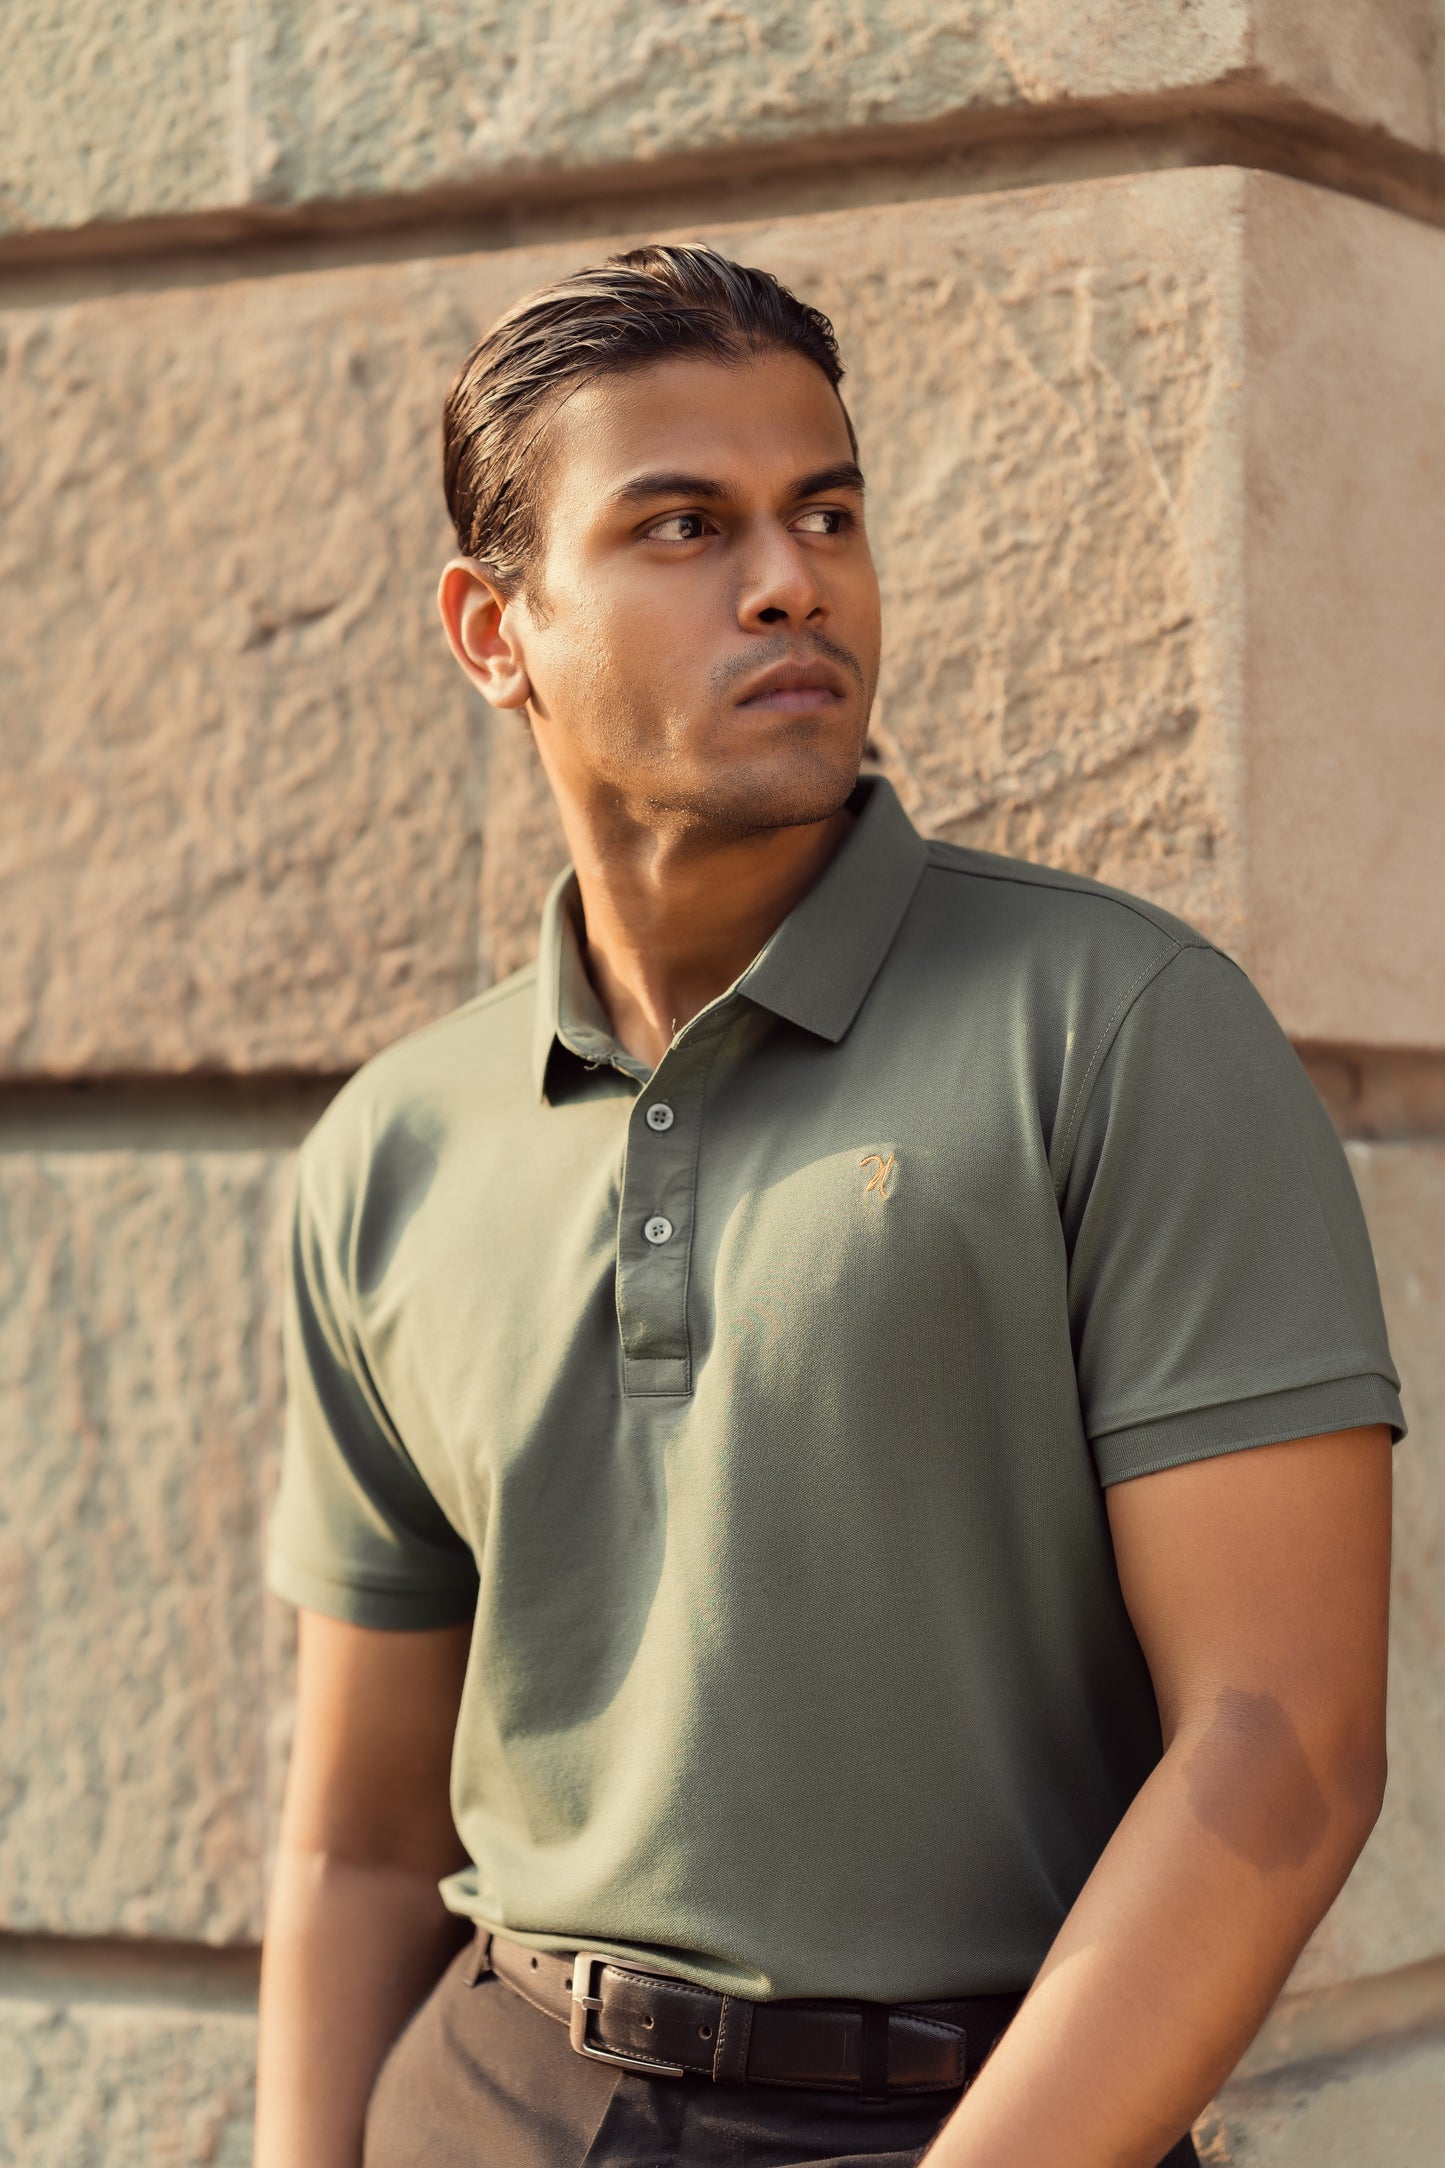 The Business Polo T-Shirt